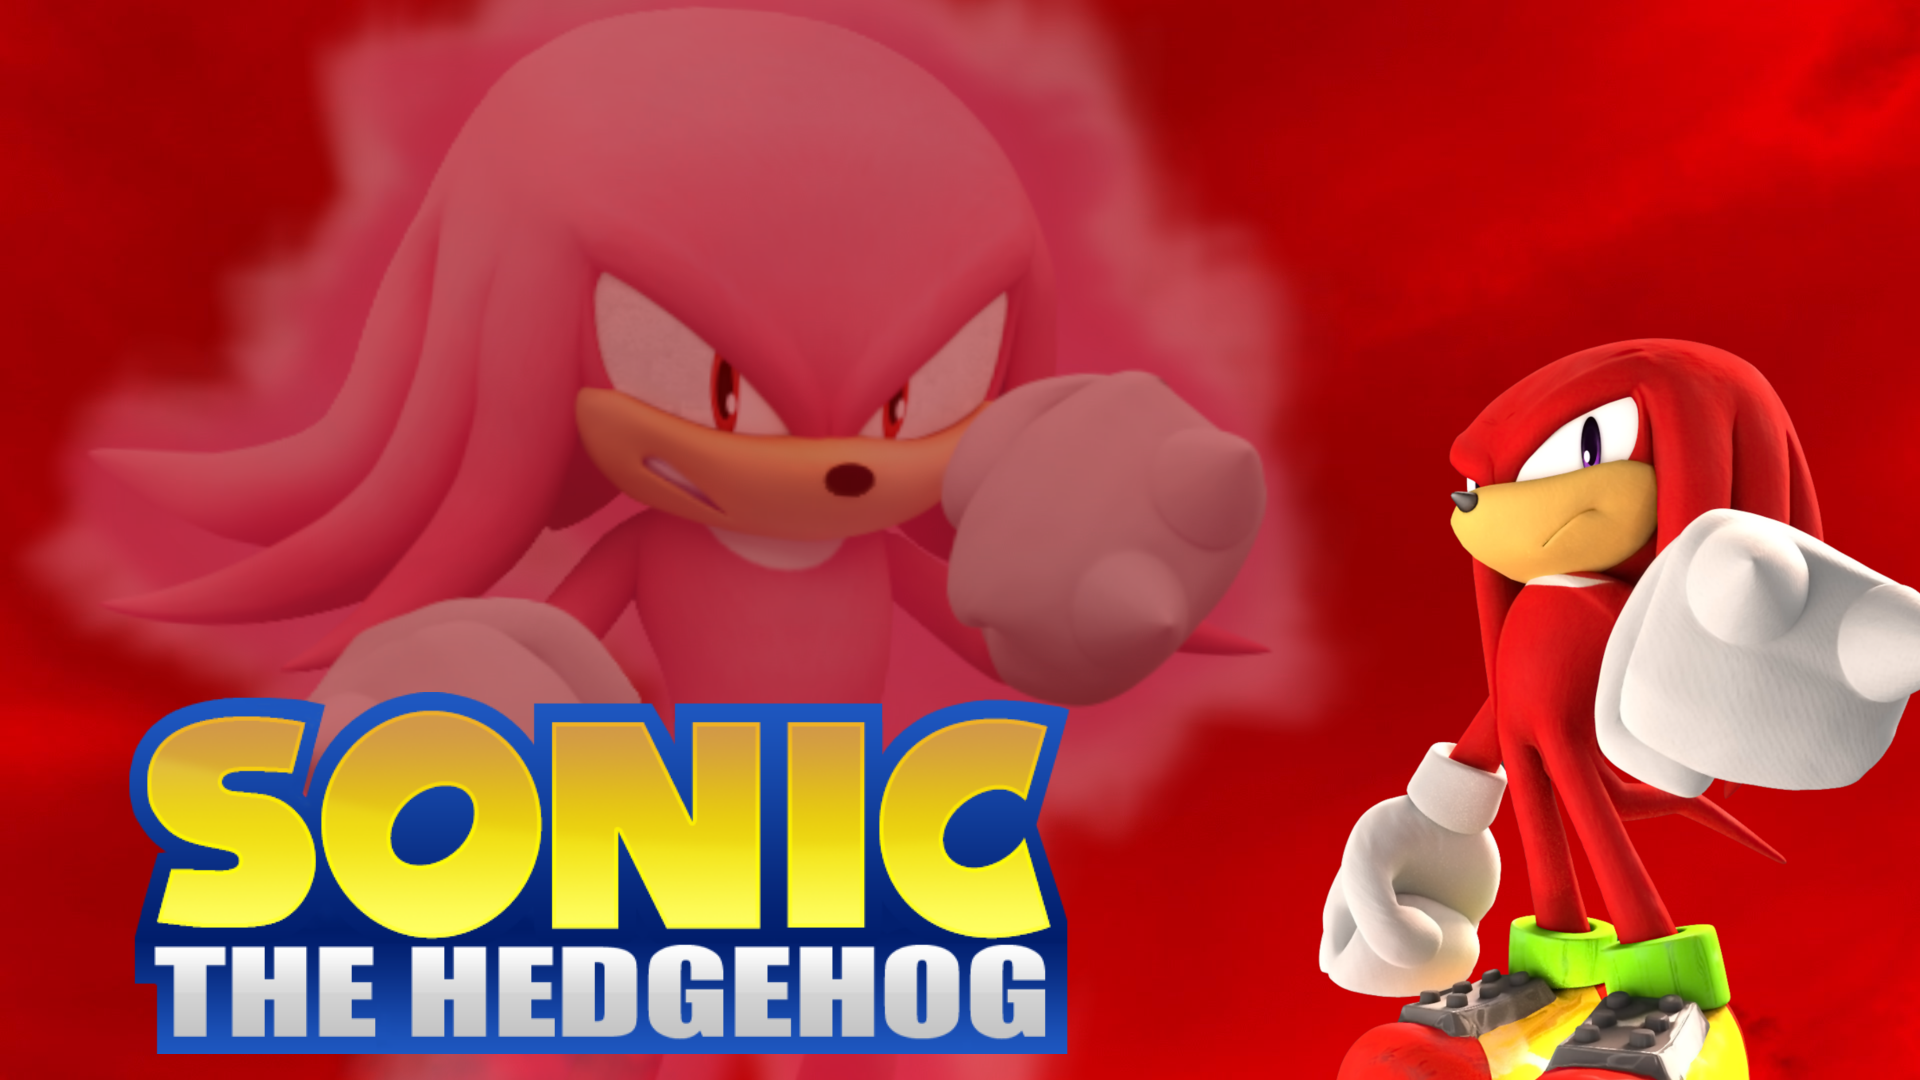 Knuckles The Echidna Wallpaper by: AxelG4m3r by AxelG4m3r on ...